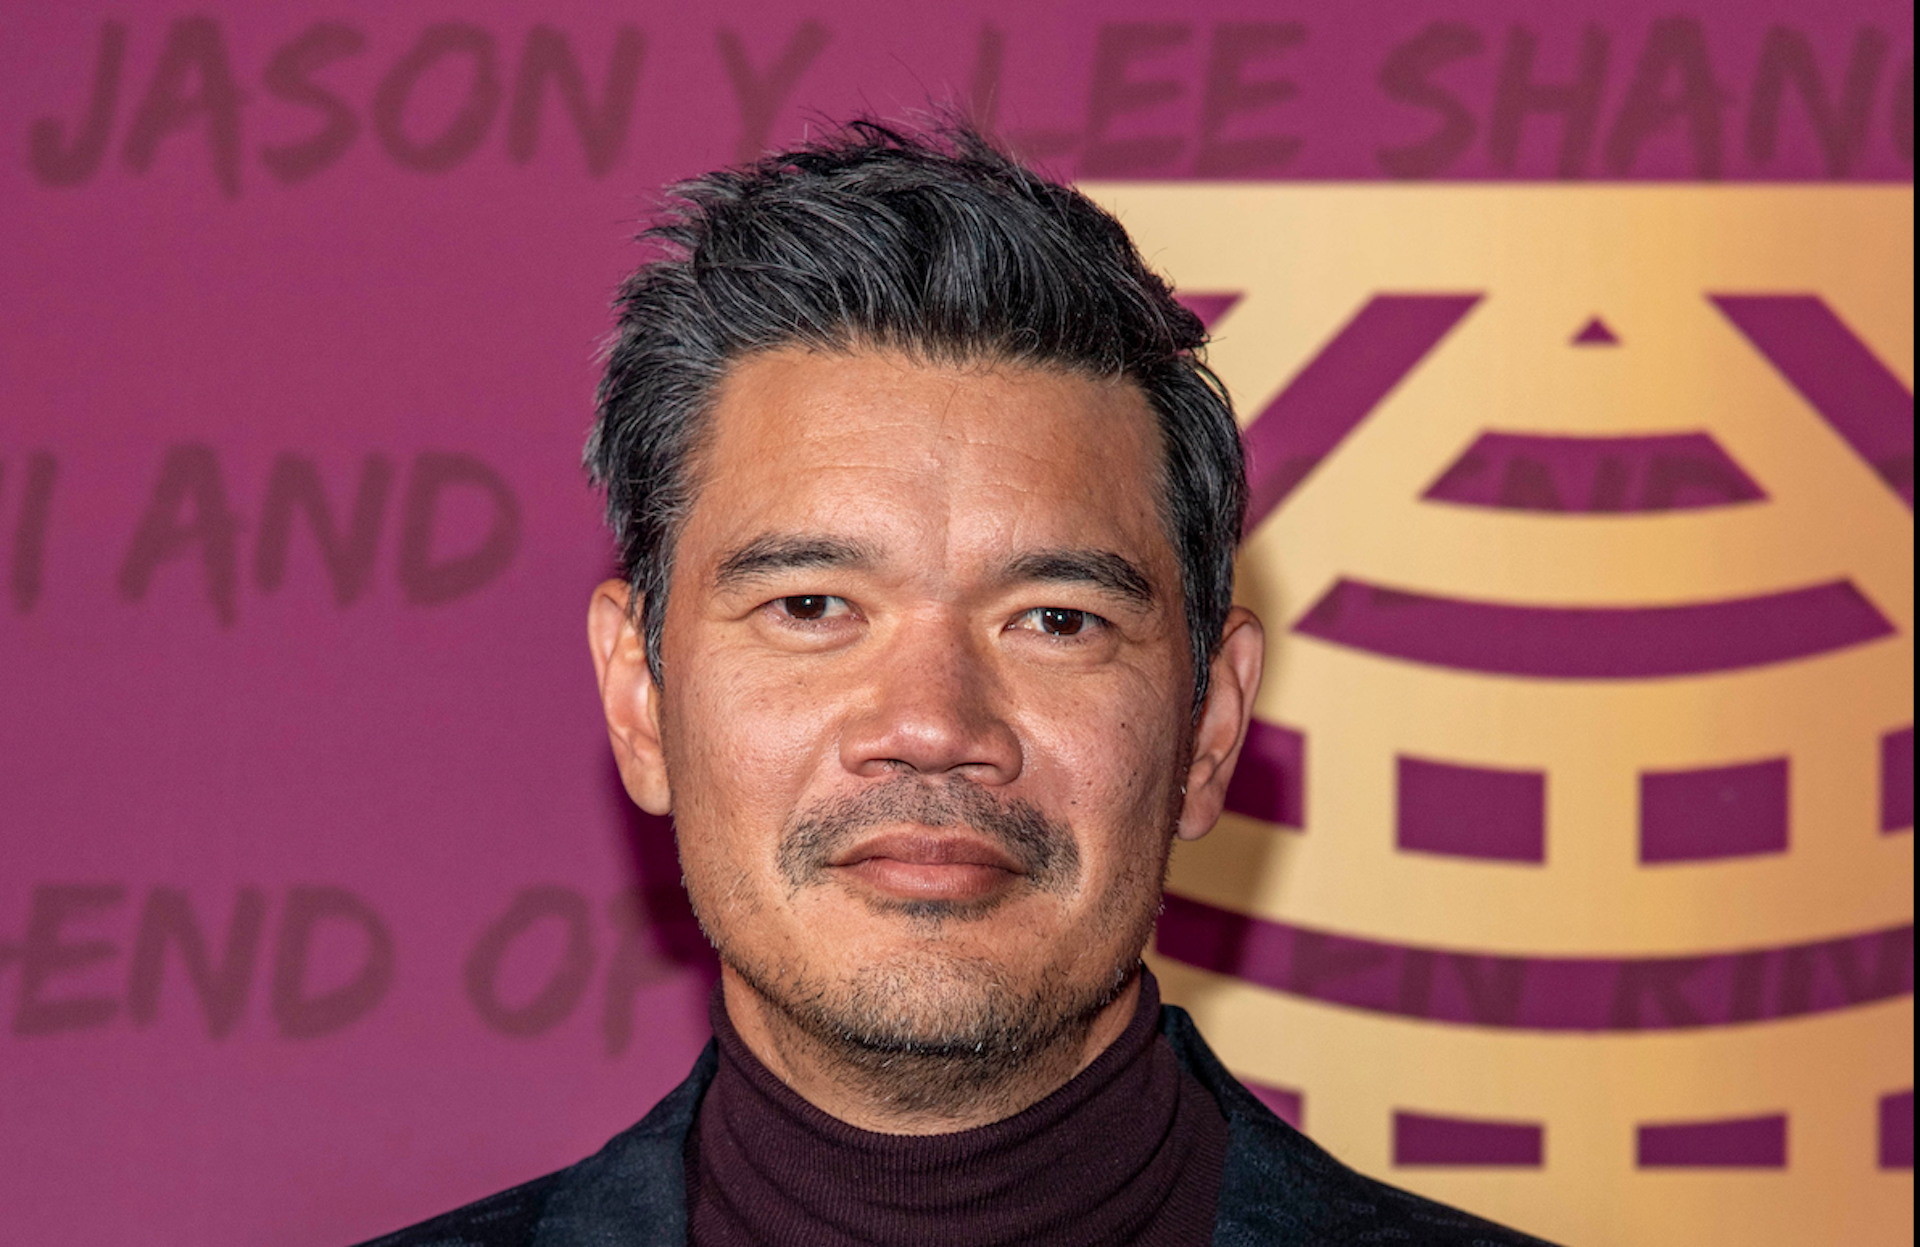 Destin Daniel Cretton, the director behind the hit film Shang-Chi and the Legend of the Ten Rings, is set to direct Avengers: The Kang Dynasty. 